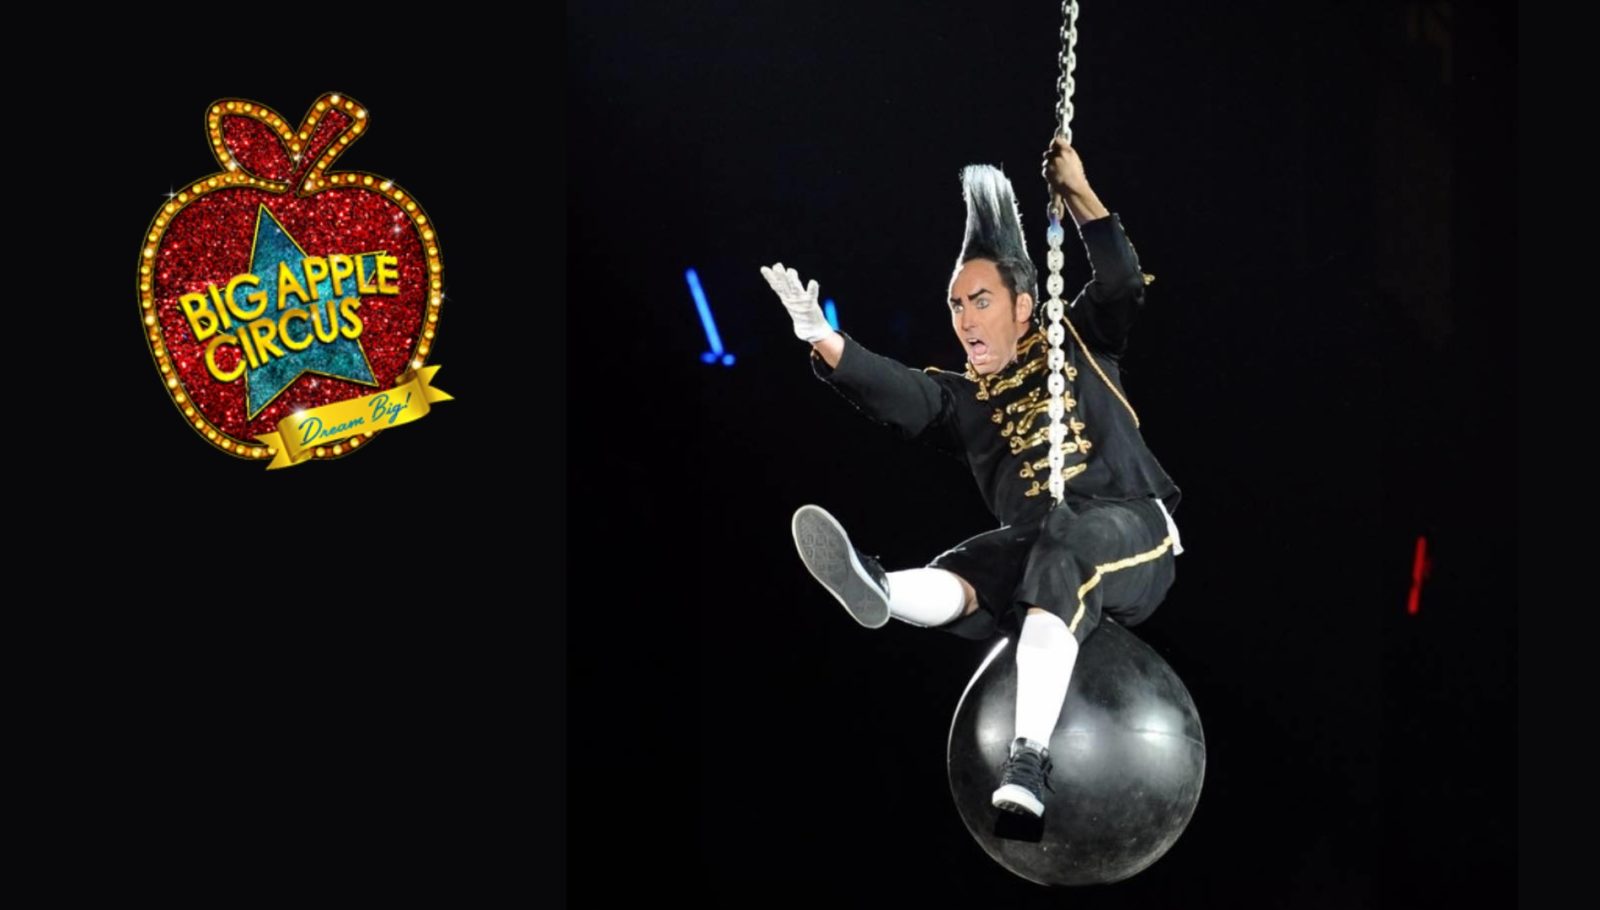 Comedian and daredevil Johnny Rocket rides on a wrecking ball to greet Big Apple Circus audiences